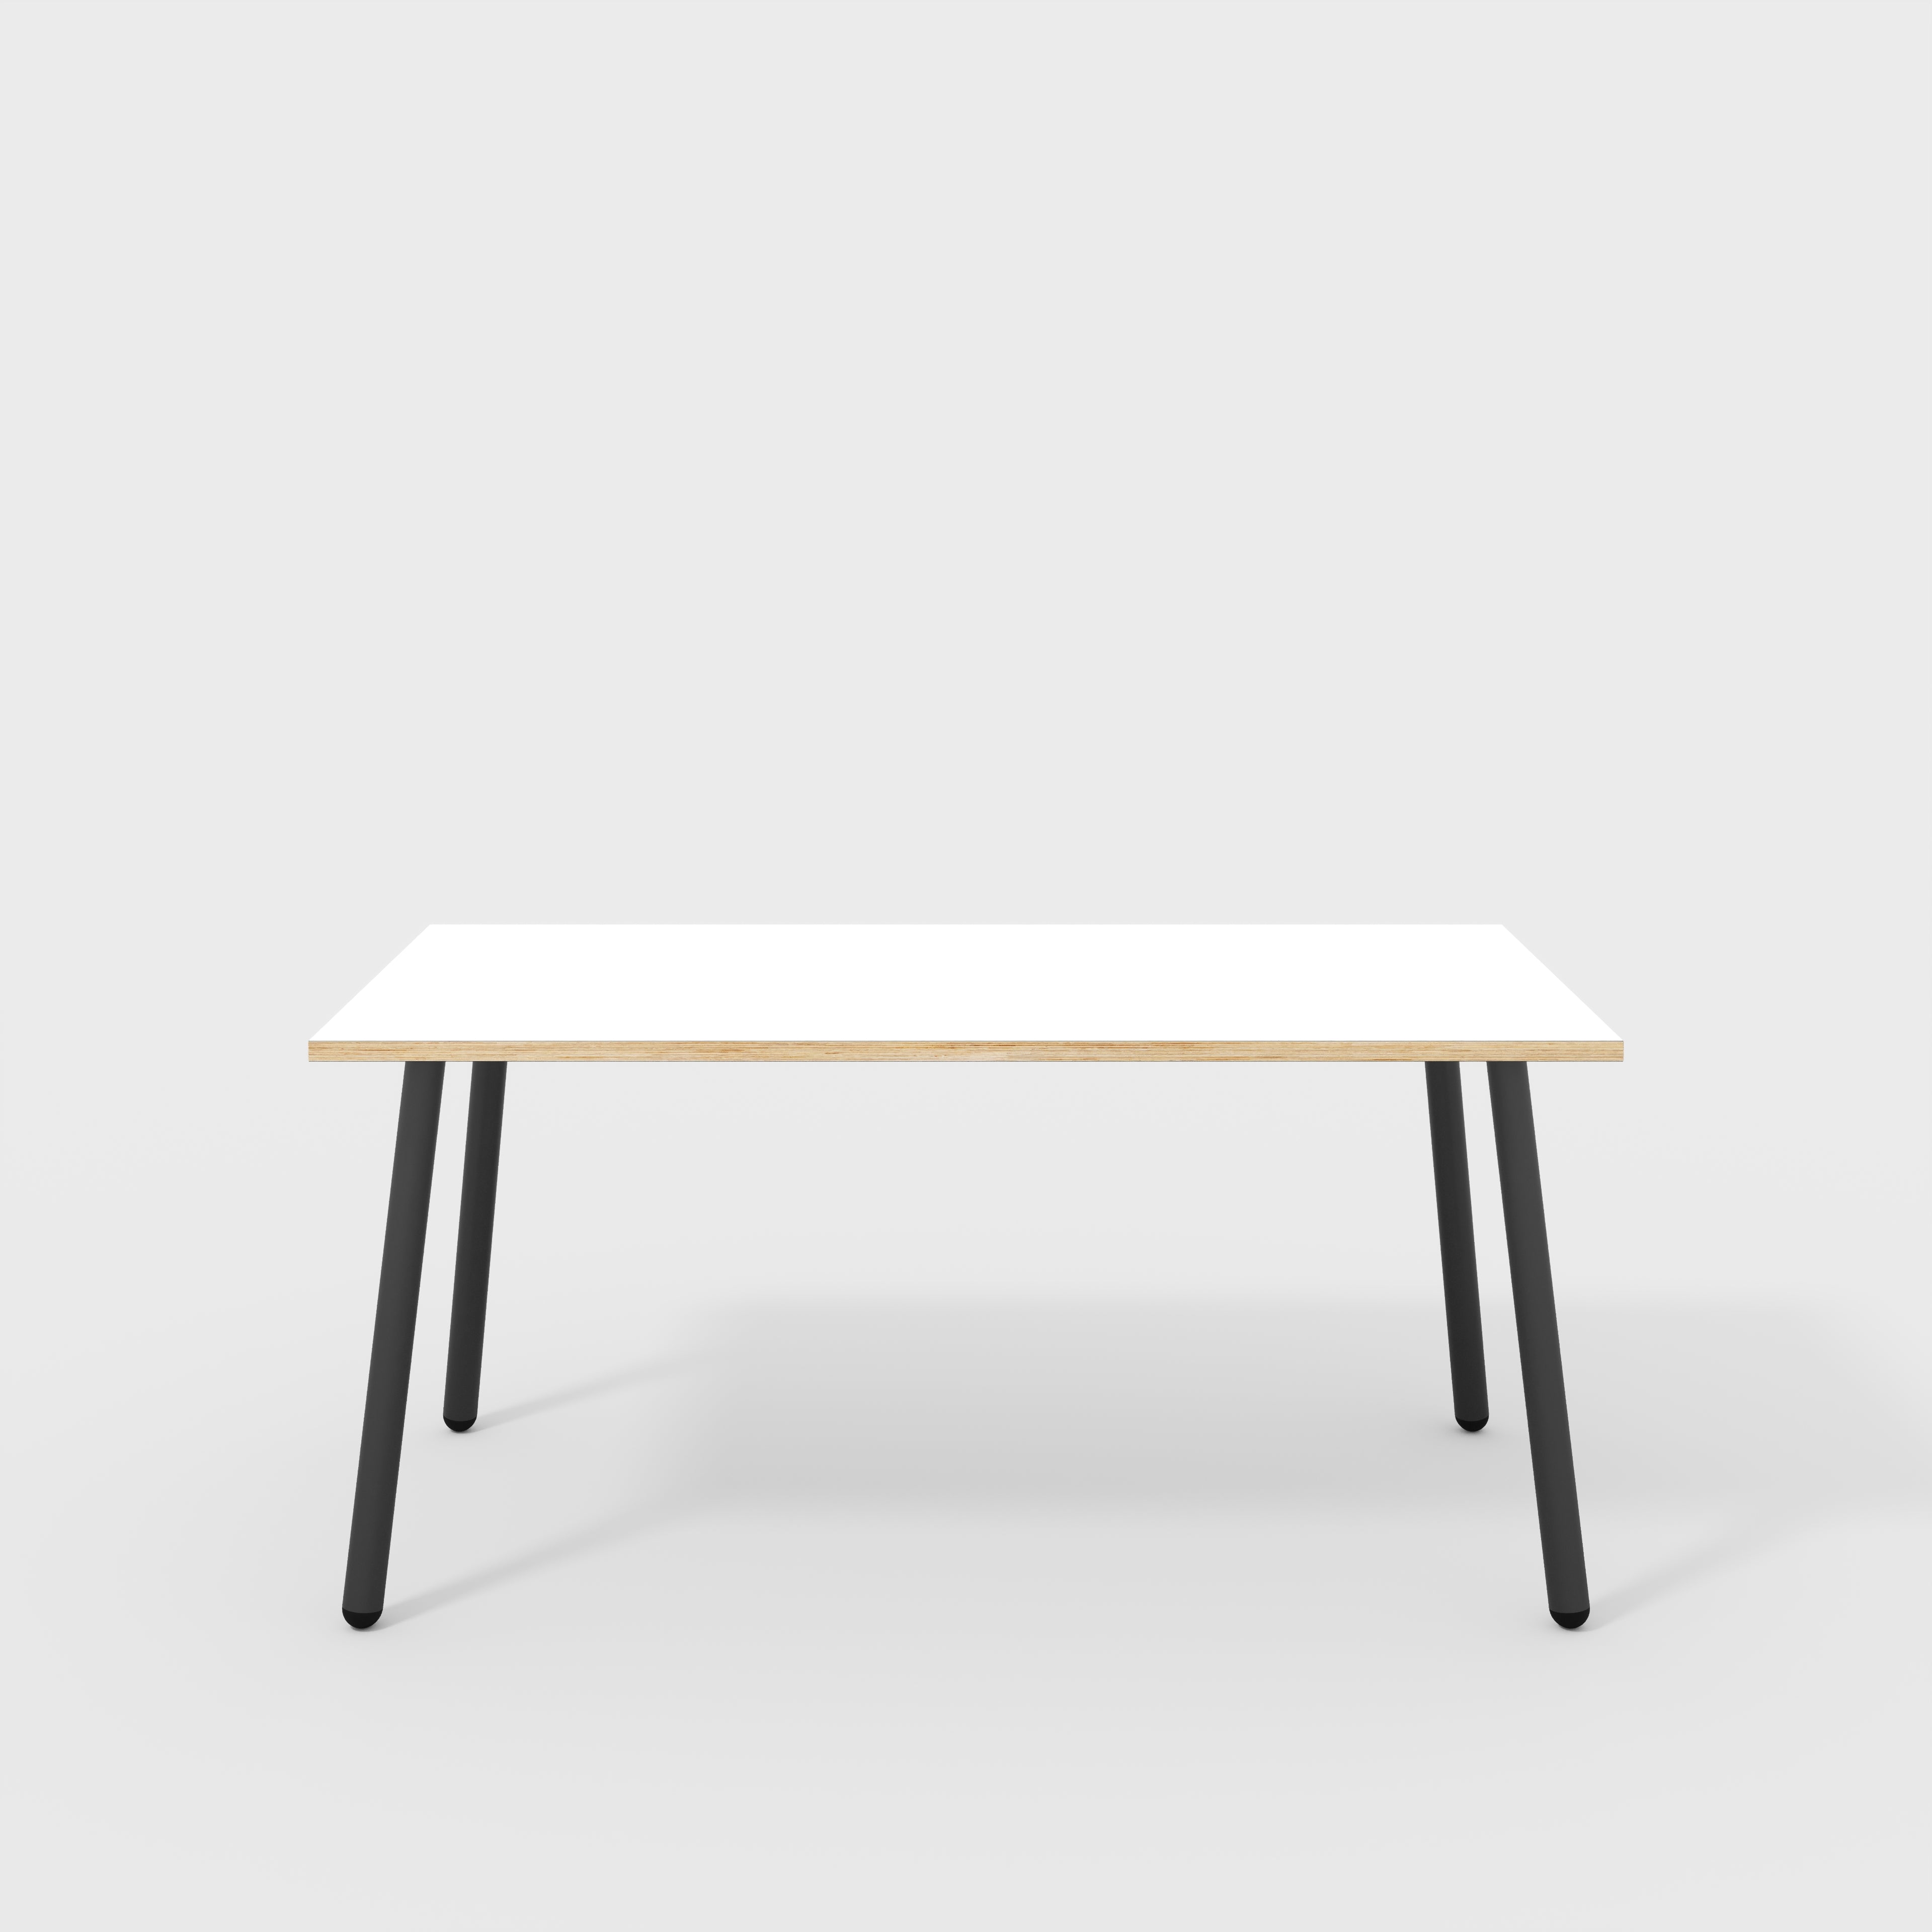 Table with Black Round Single Pin Legs - Formica White - 1600(w) x 800(d) x 735(h)